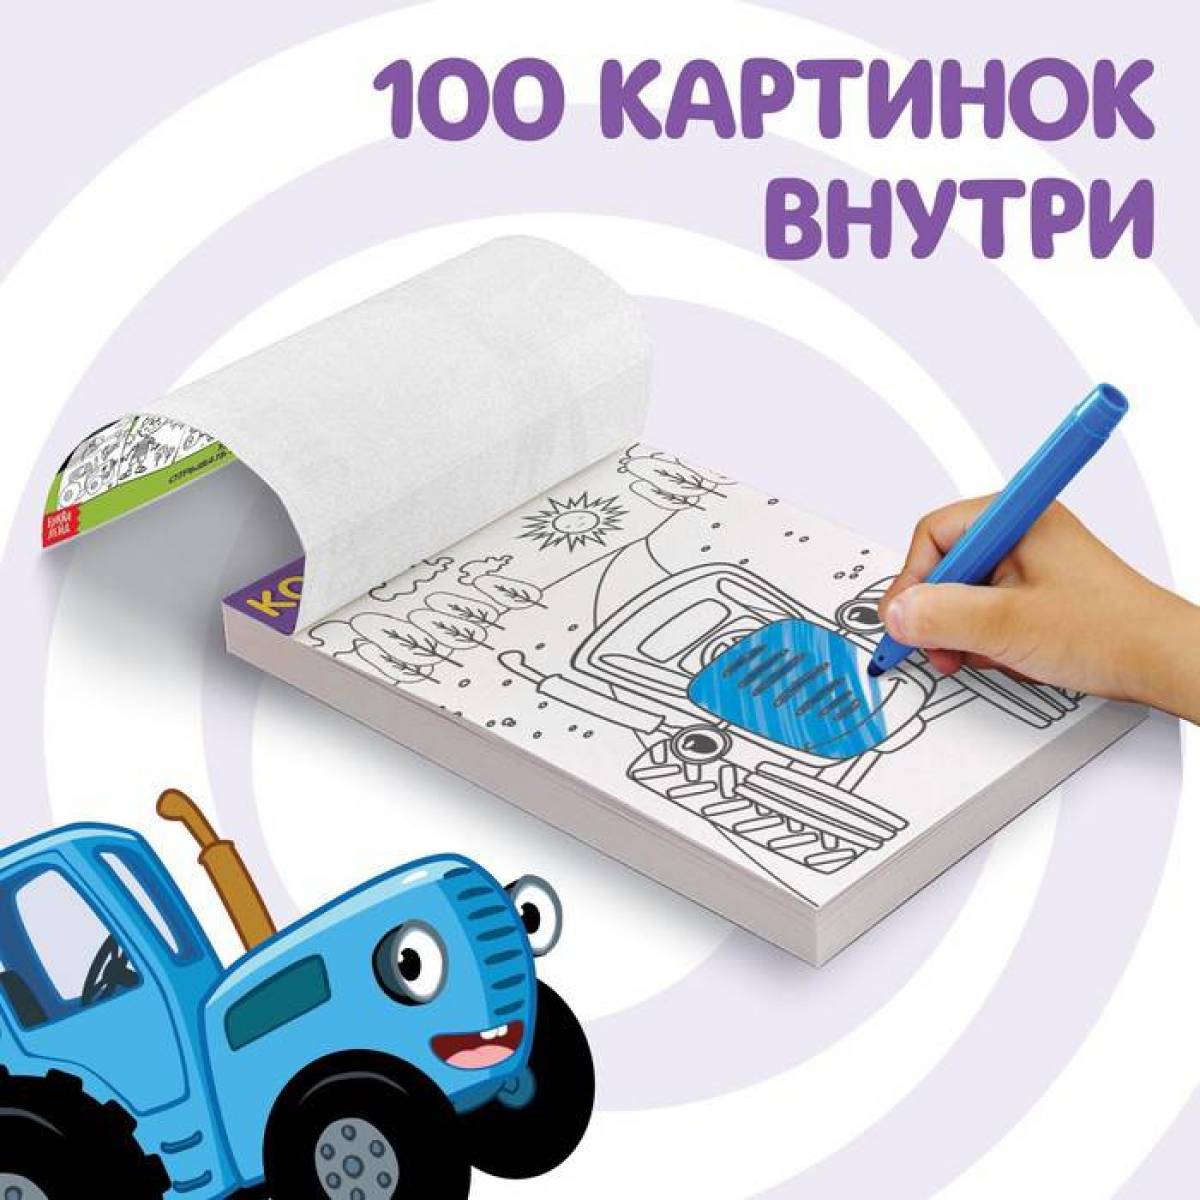 Tractor bright blue coloring book